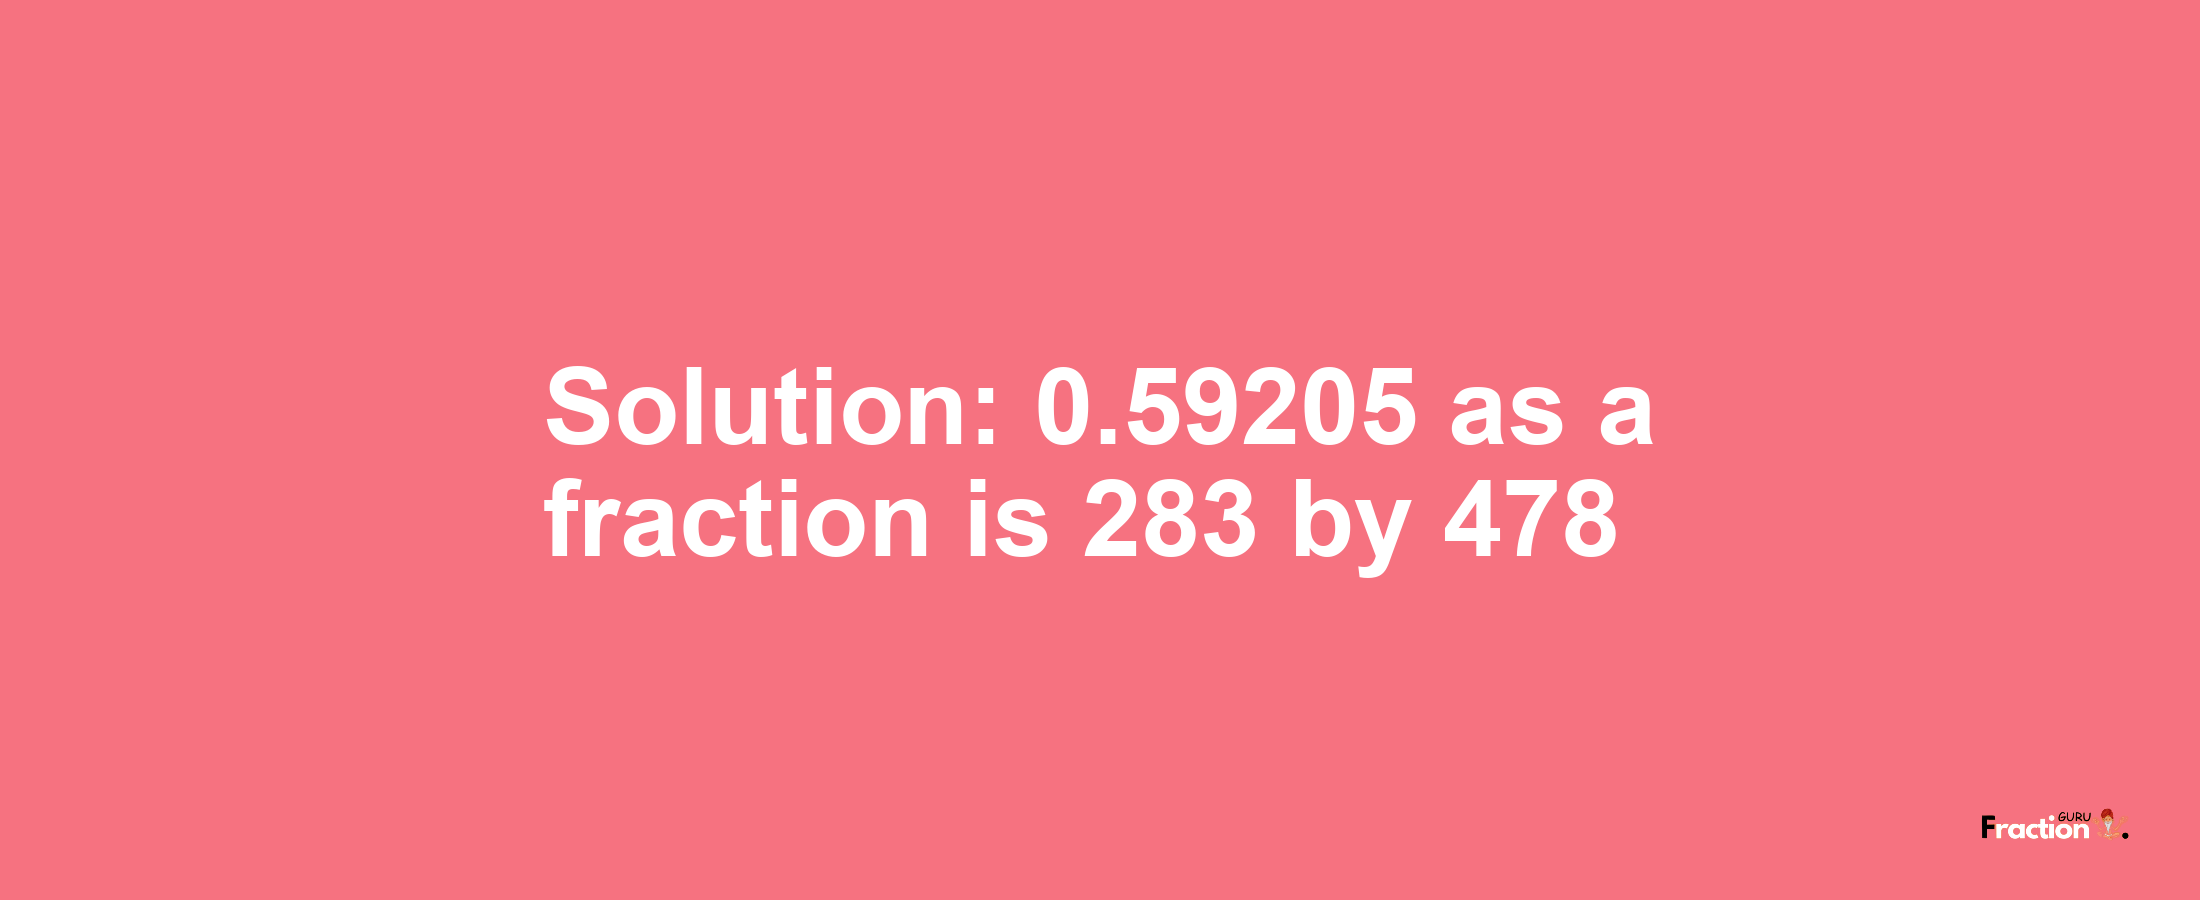 Solution:0.59205 as a fraction is 283/478